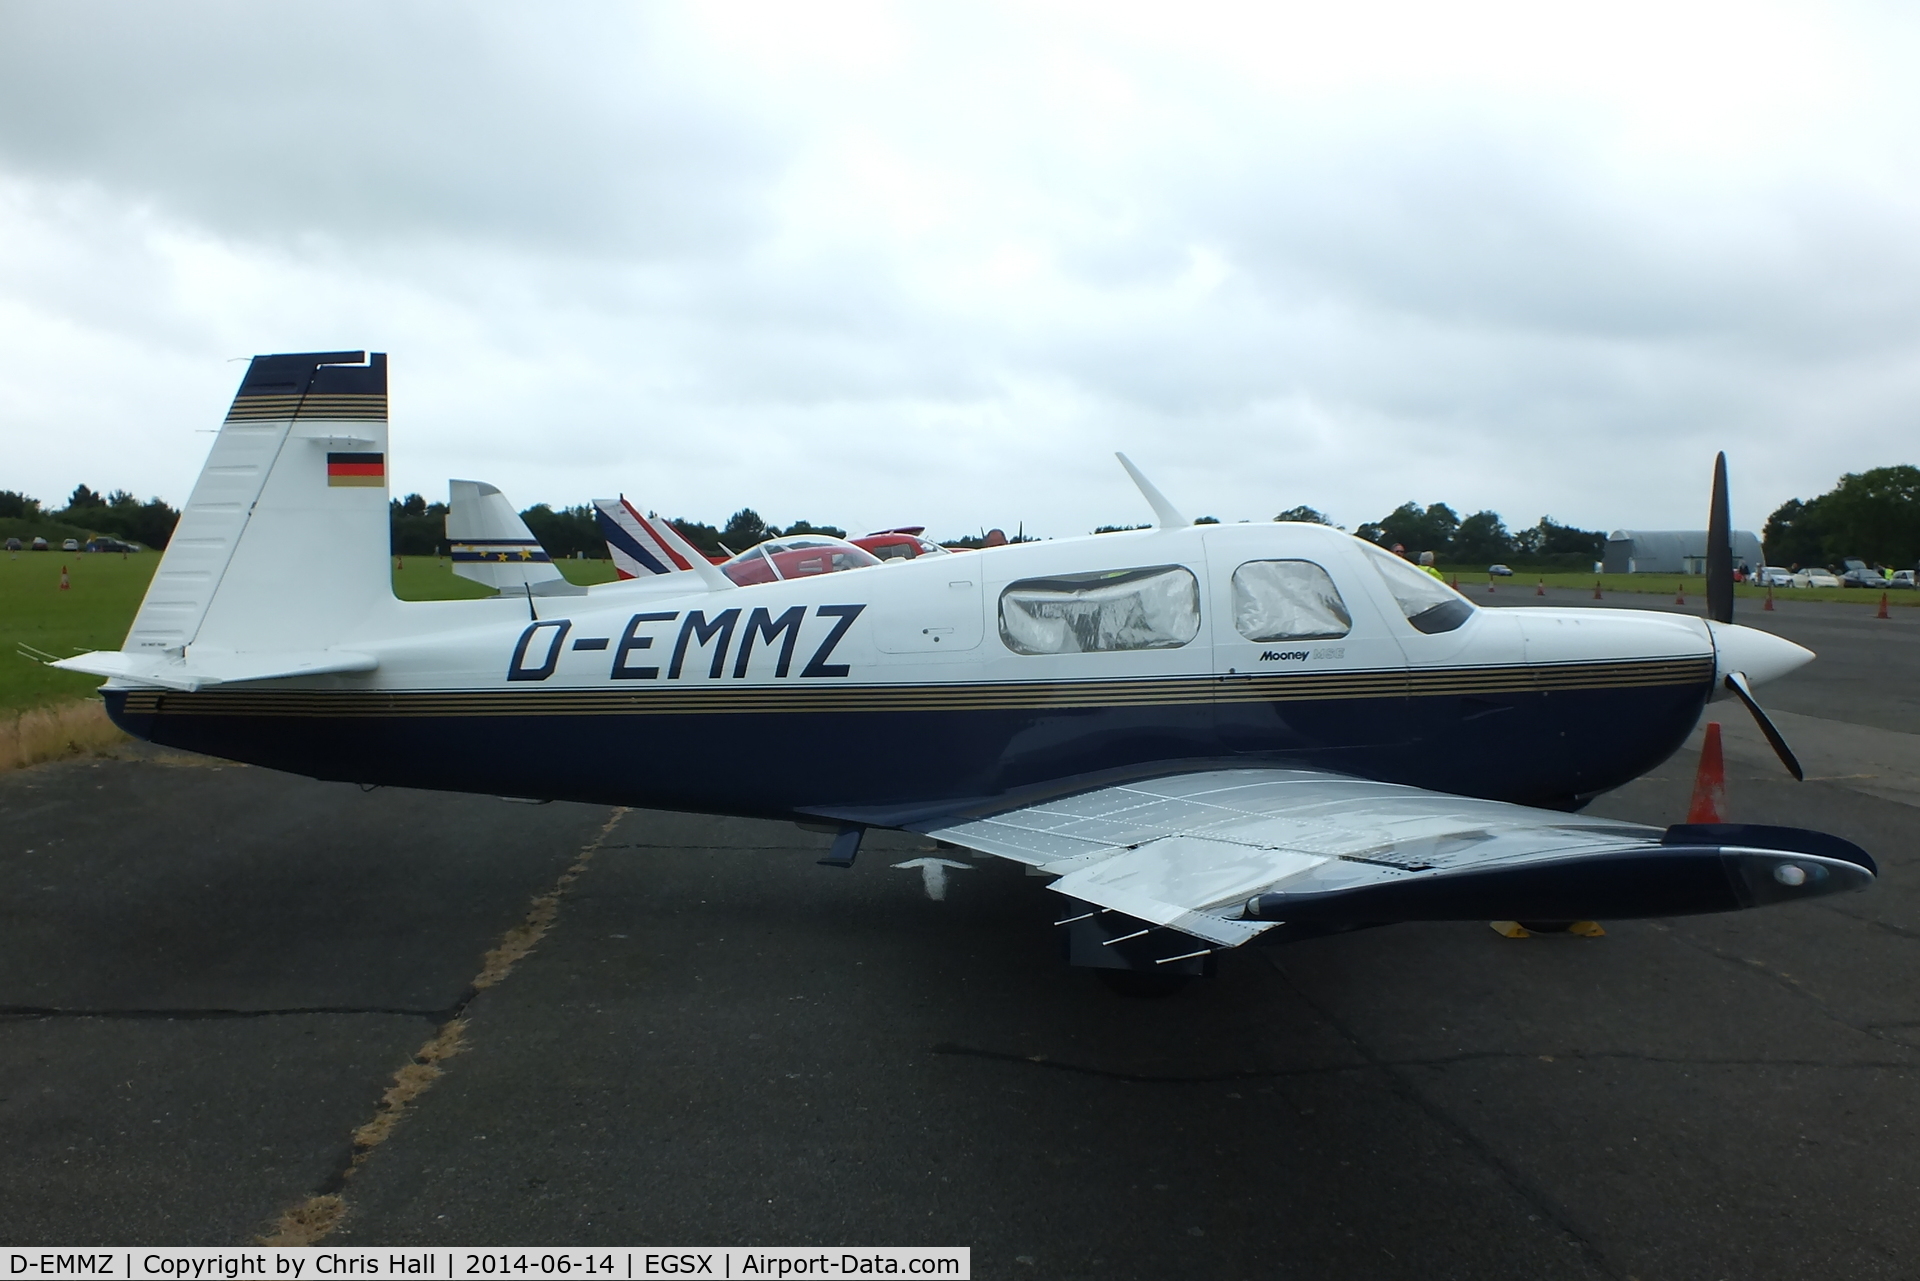 D-EMMZ, Mooney M.20J 205 C/N 24-3367, at the Air Britain fly in